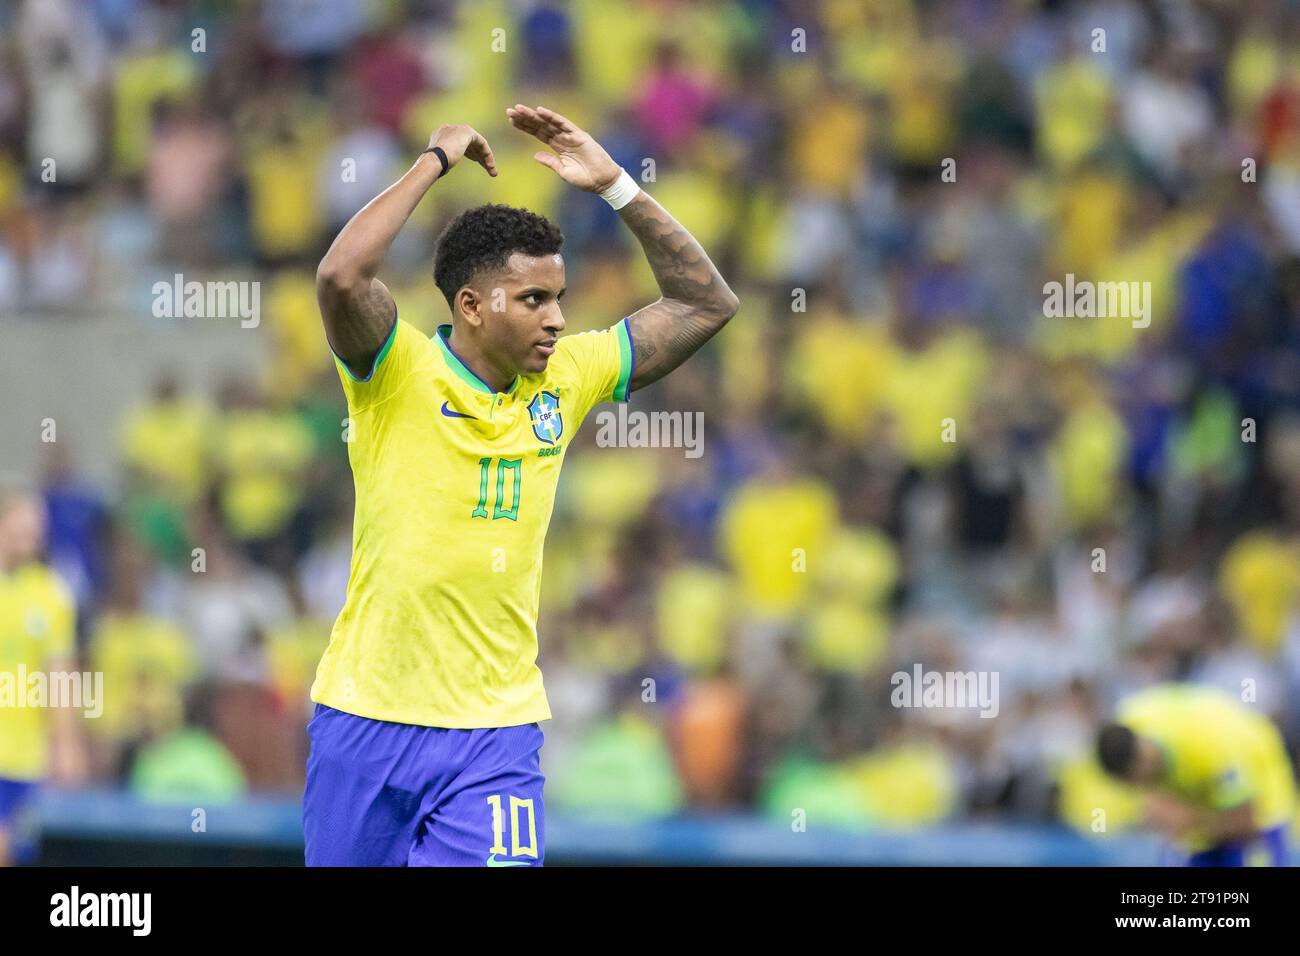 Rio De Janeiro, Brazil. 21st Nov, 2023. RIO DE JANEIRO, BRAZIL - NOVEMBER 21: Rodrygo of Brazil reacts during a match between Brazil and Argentina as part of 2026 FIFA World Cup South American Qualification at Maracana Stadium on November 21, 2023 in Rio de Janeiro, Brazil. (Photo by Wanderson Oliveira/PxImages/Sipa USA) Credit: Sipa USA/Alamy Live News Stock Photo